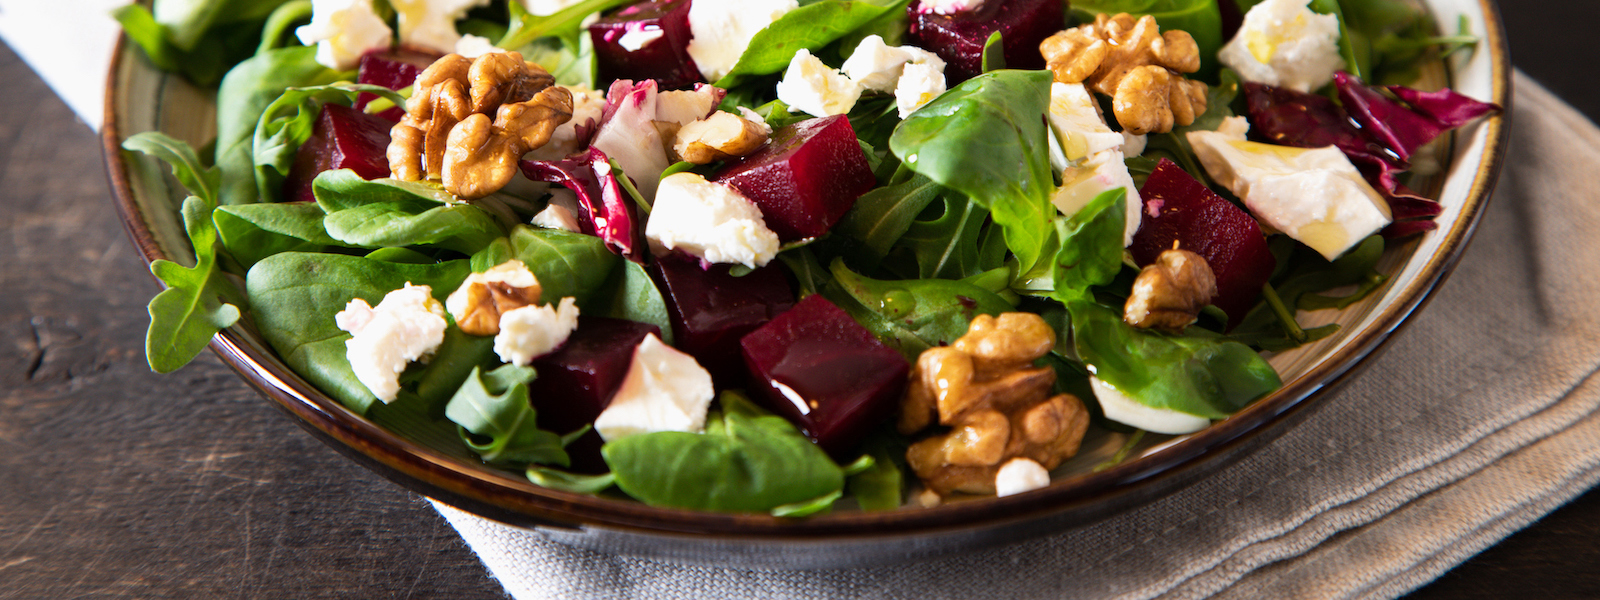 Beet or beetroot salad with fresh arugula, soft cheese and walnuts on plate, dressing and spices on dark wooden background, copy space, top view